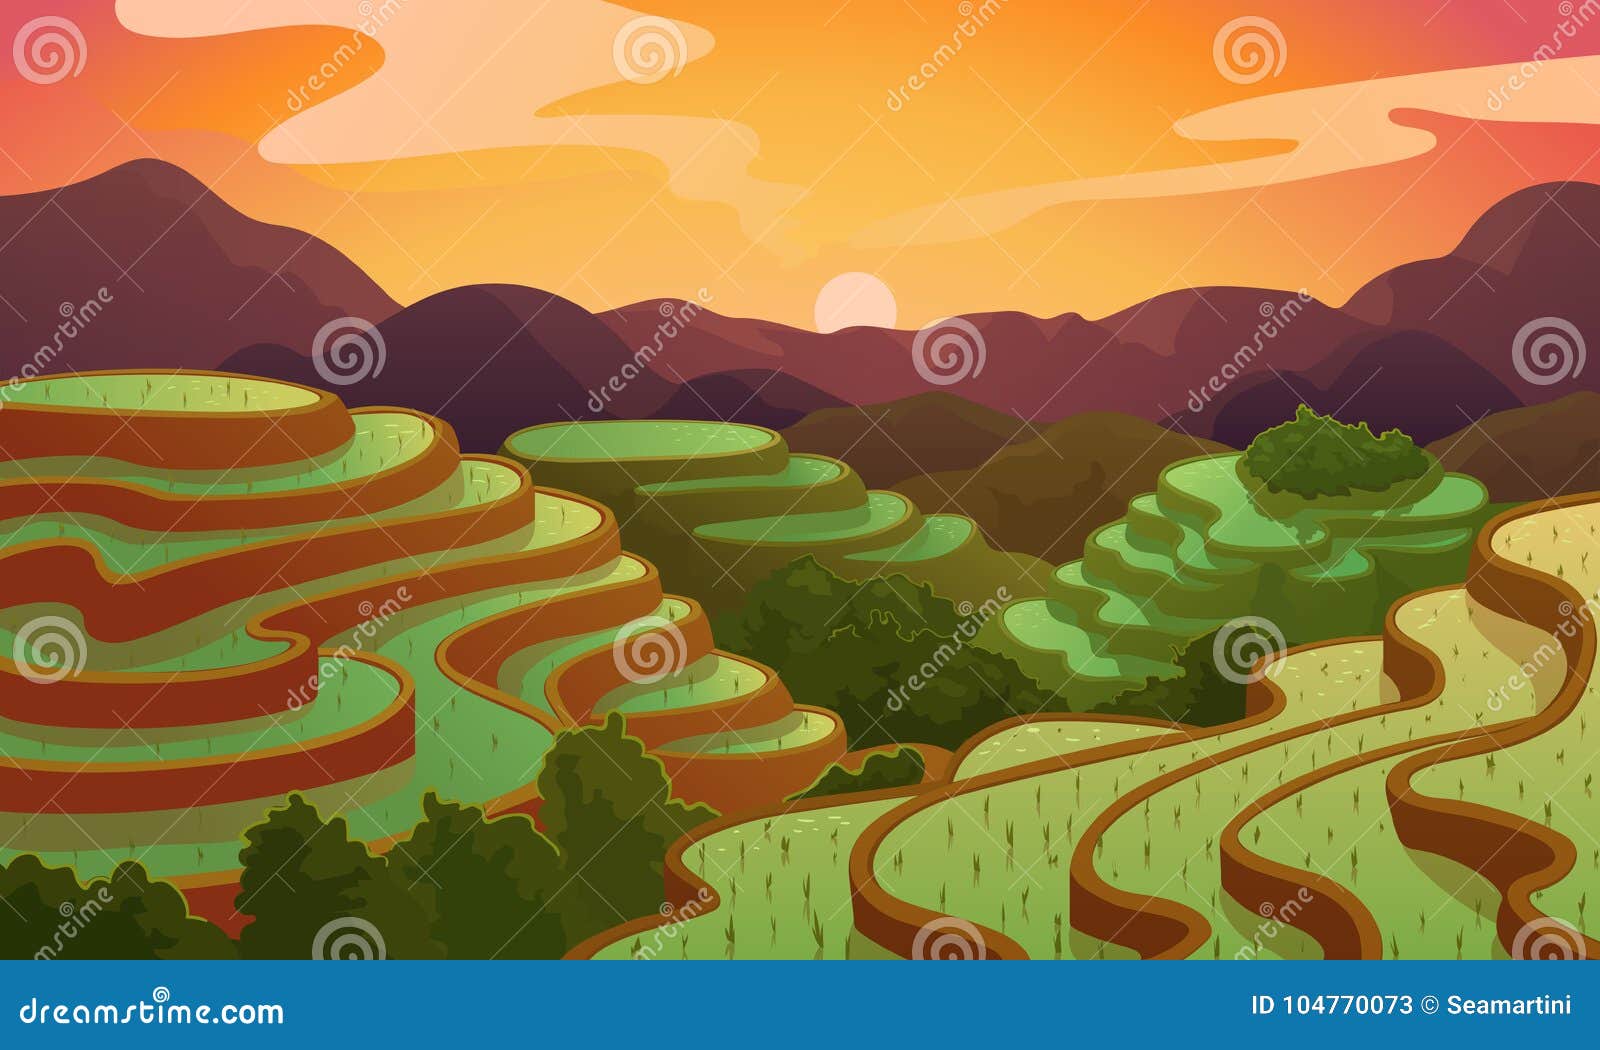 Share more than 161 terrace farming drawing best